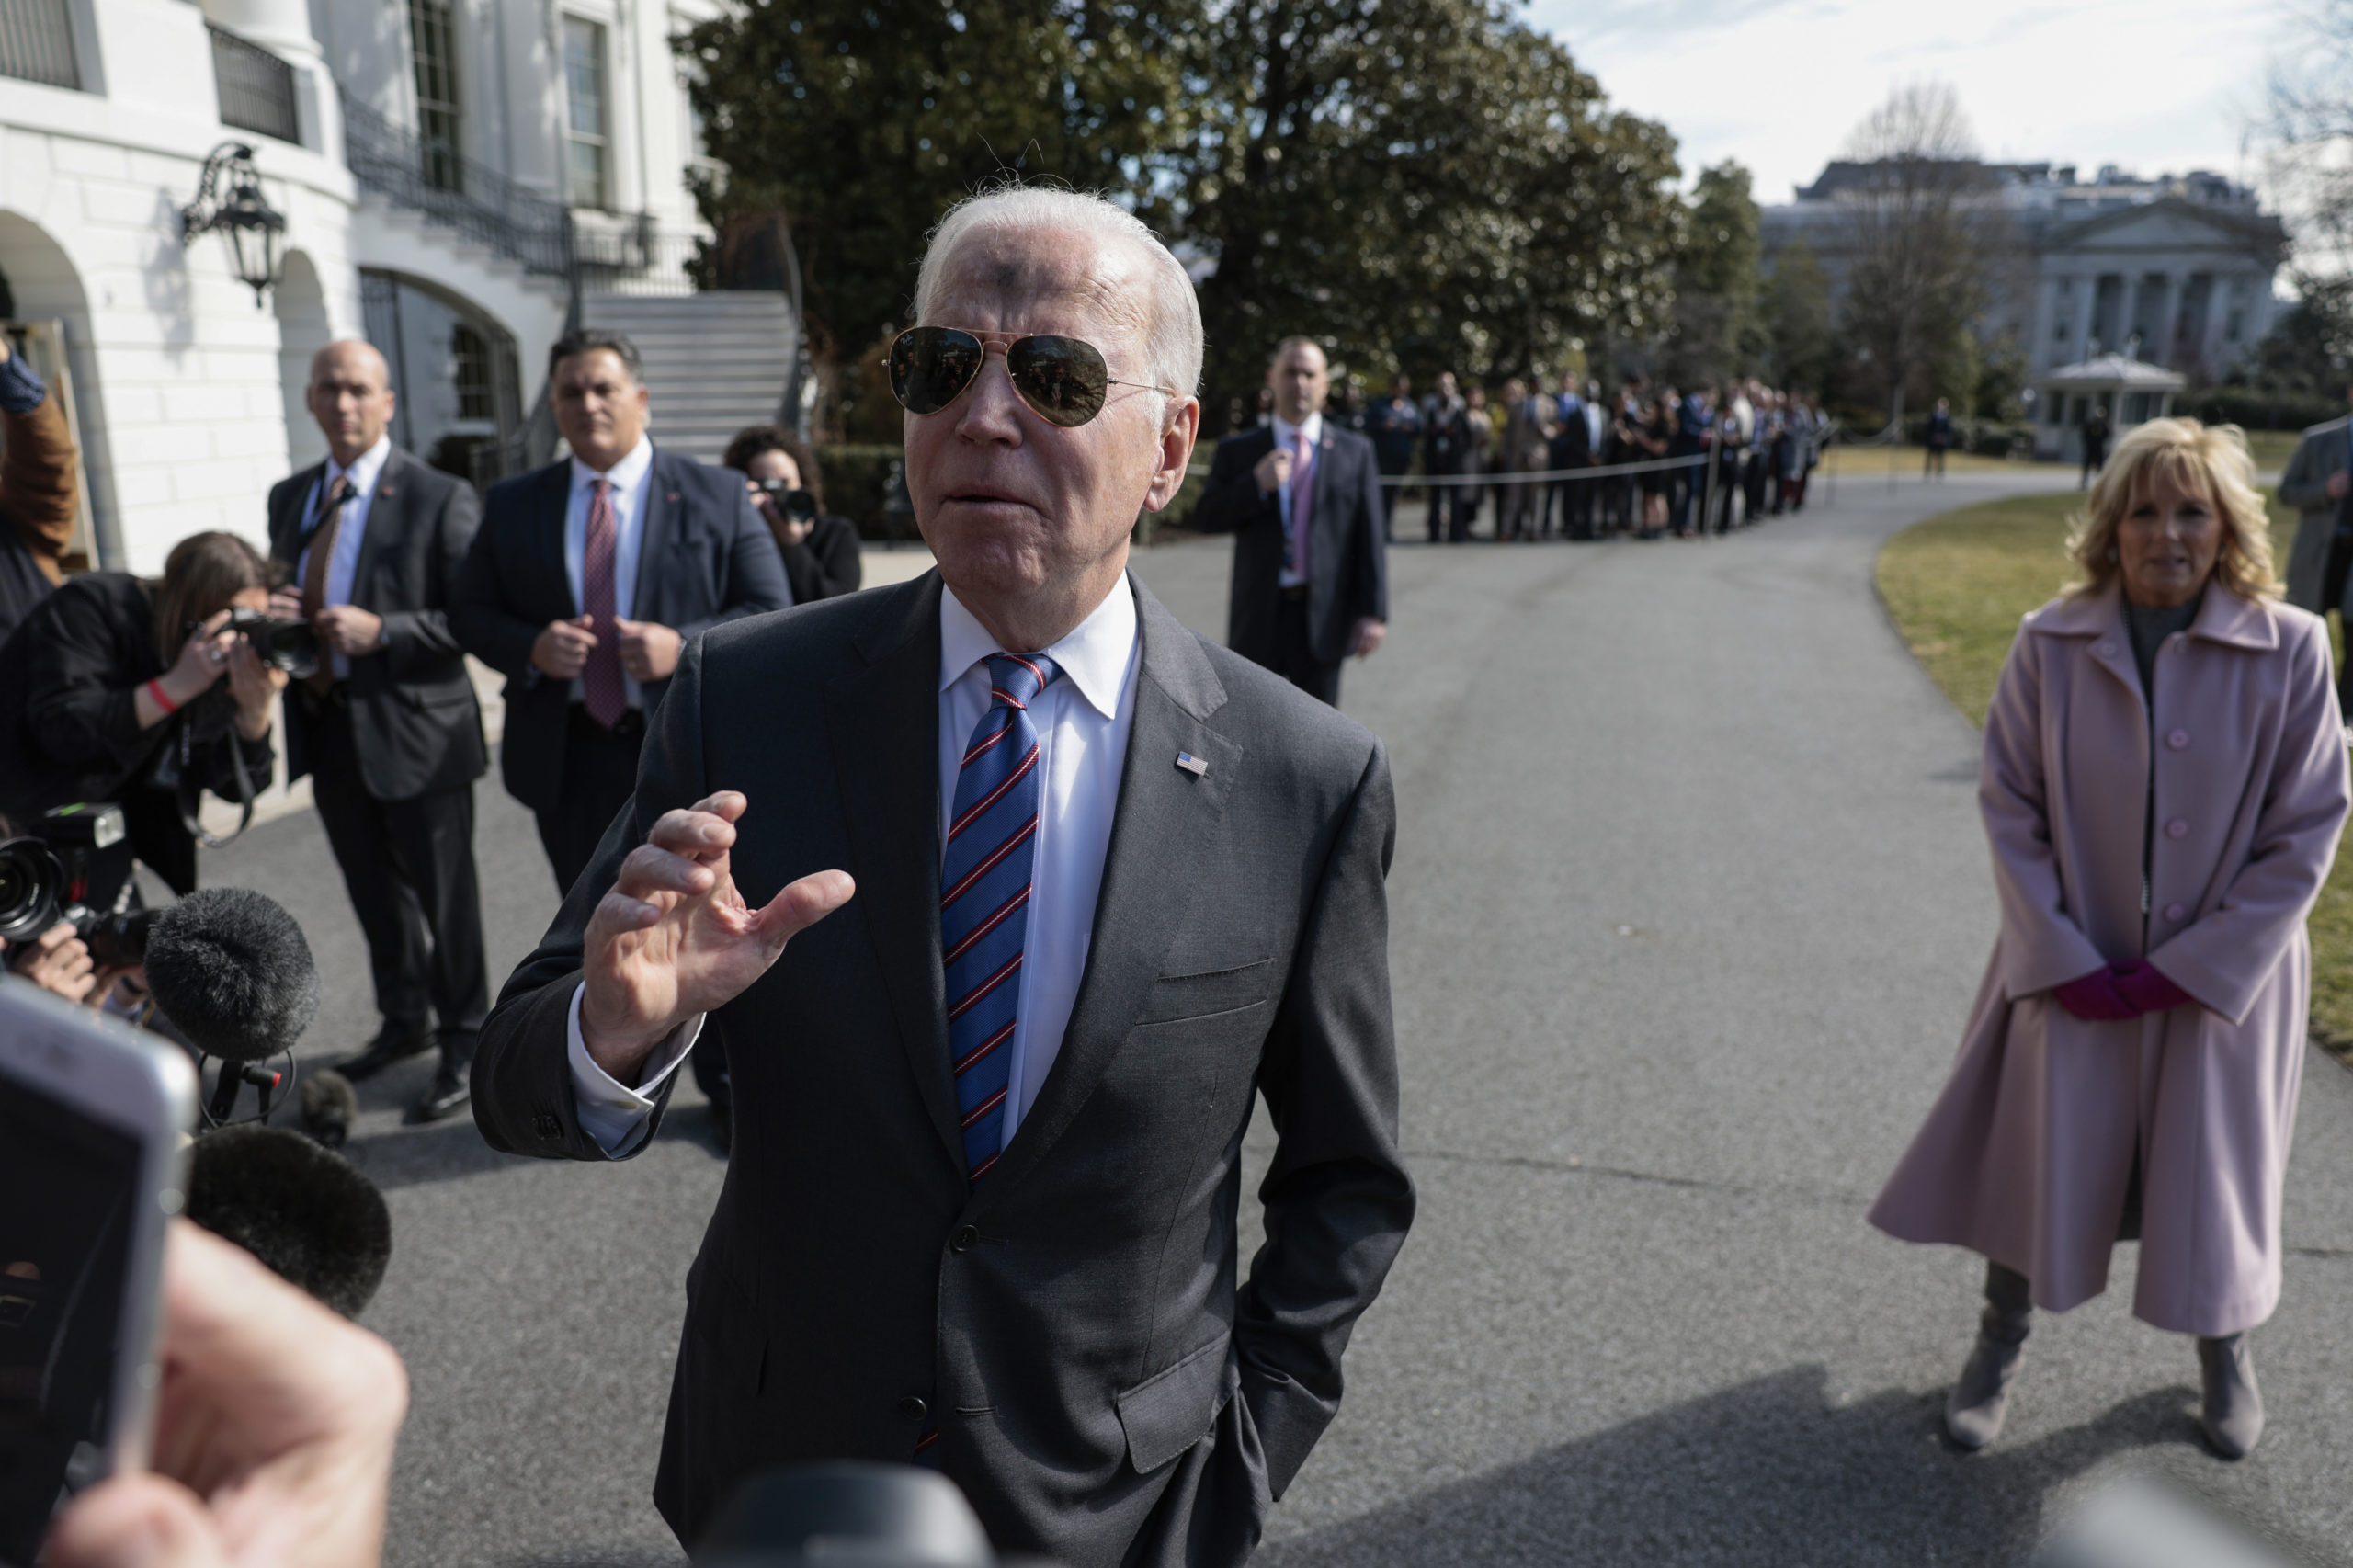 President Joe Biden, with ashes on his forehead in honor of Ash Wednesday, speaks to reporters before boarding Marine One with First Lady Jill Biden on the South Lawn of the White House on March 02, 2022 in Washington, DC. The Bidens are spending the day in Superior, Wisconsin, with cabinet members where they will give remarks on the bipartisan infrastructure legislation. (Photo by Anna Moneymaker/Getty Images)